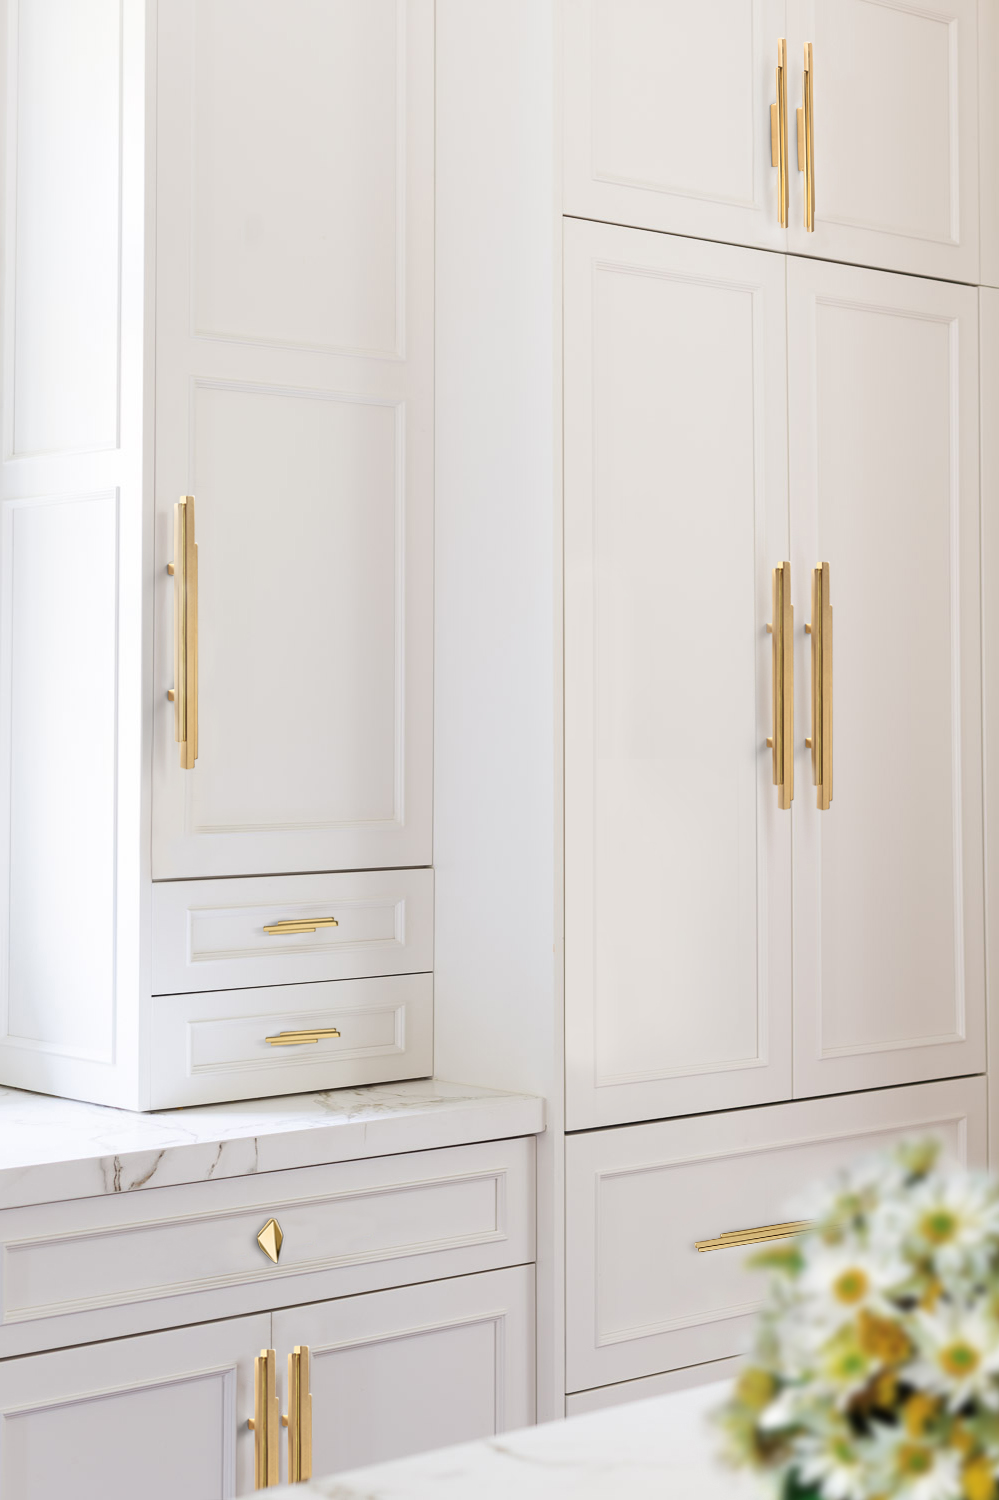 Kitchen cabinetry enriched with Skyline cabinet hardware handles by PullCast. How easy it is to upscale your kitchen!